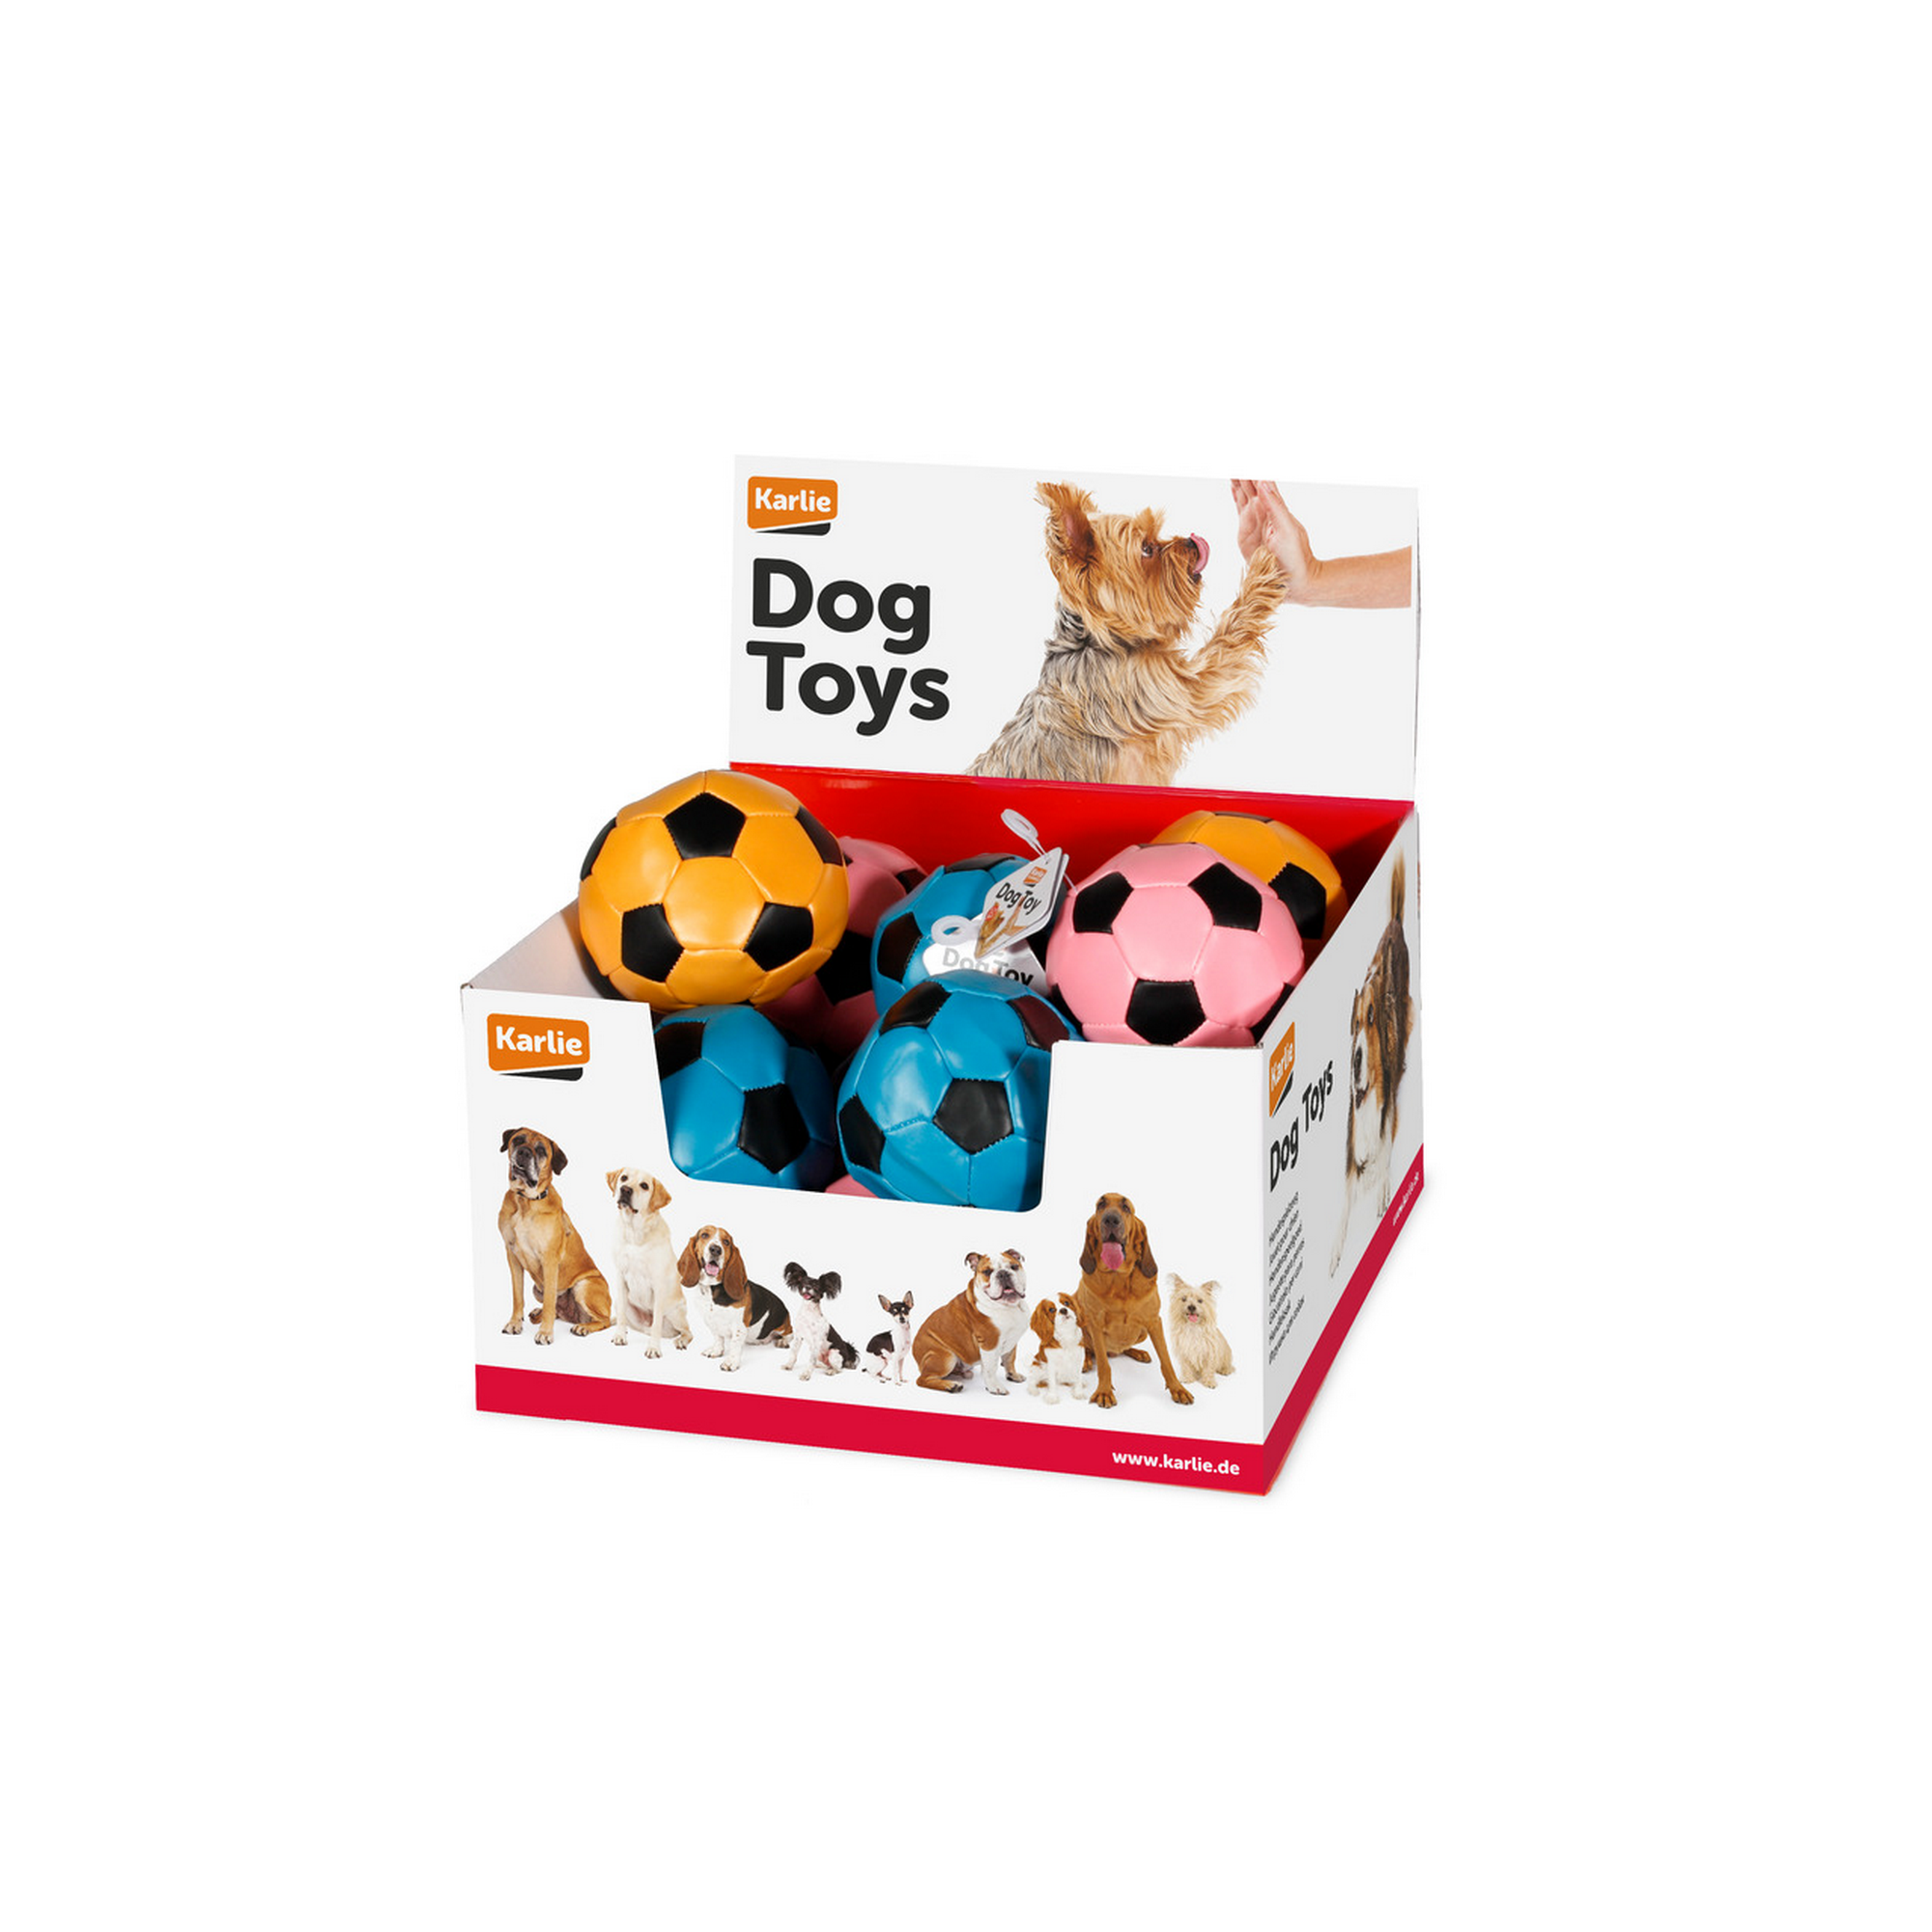 Hundespielzeug Fußball sortiert Ø 10 cm + product picture